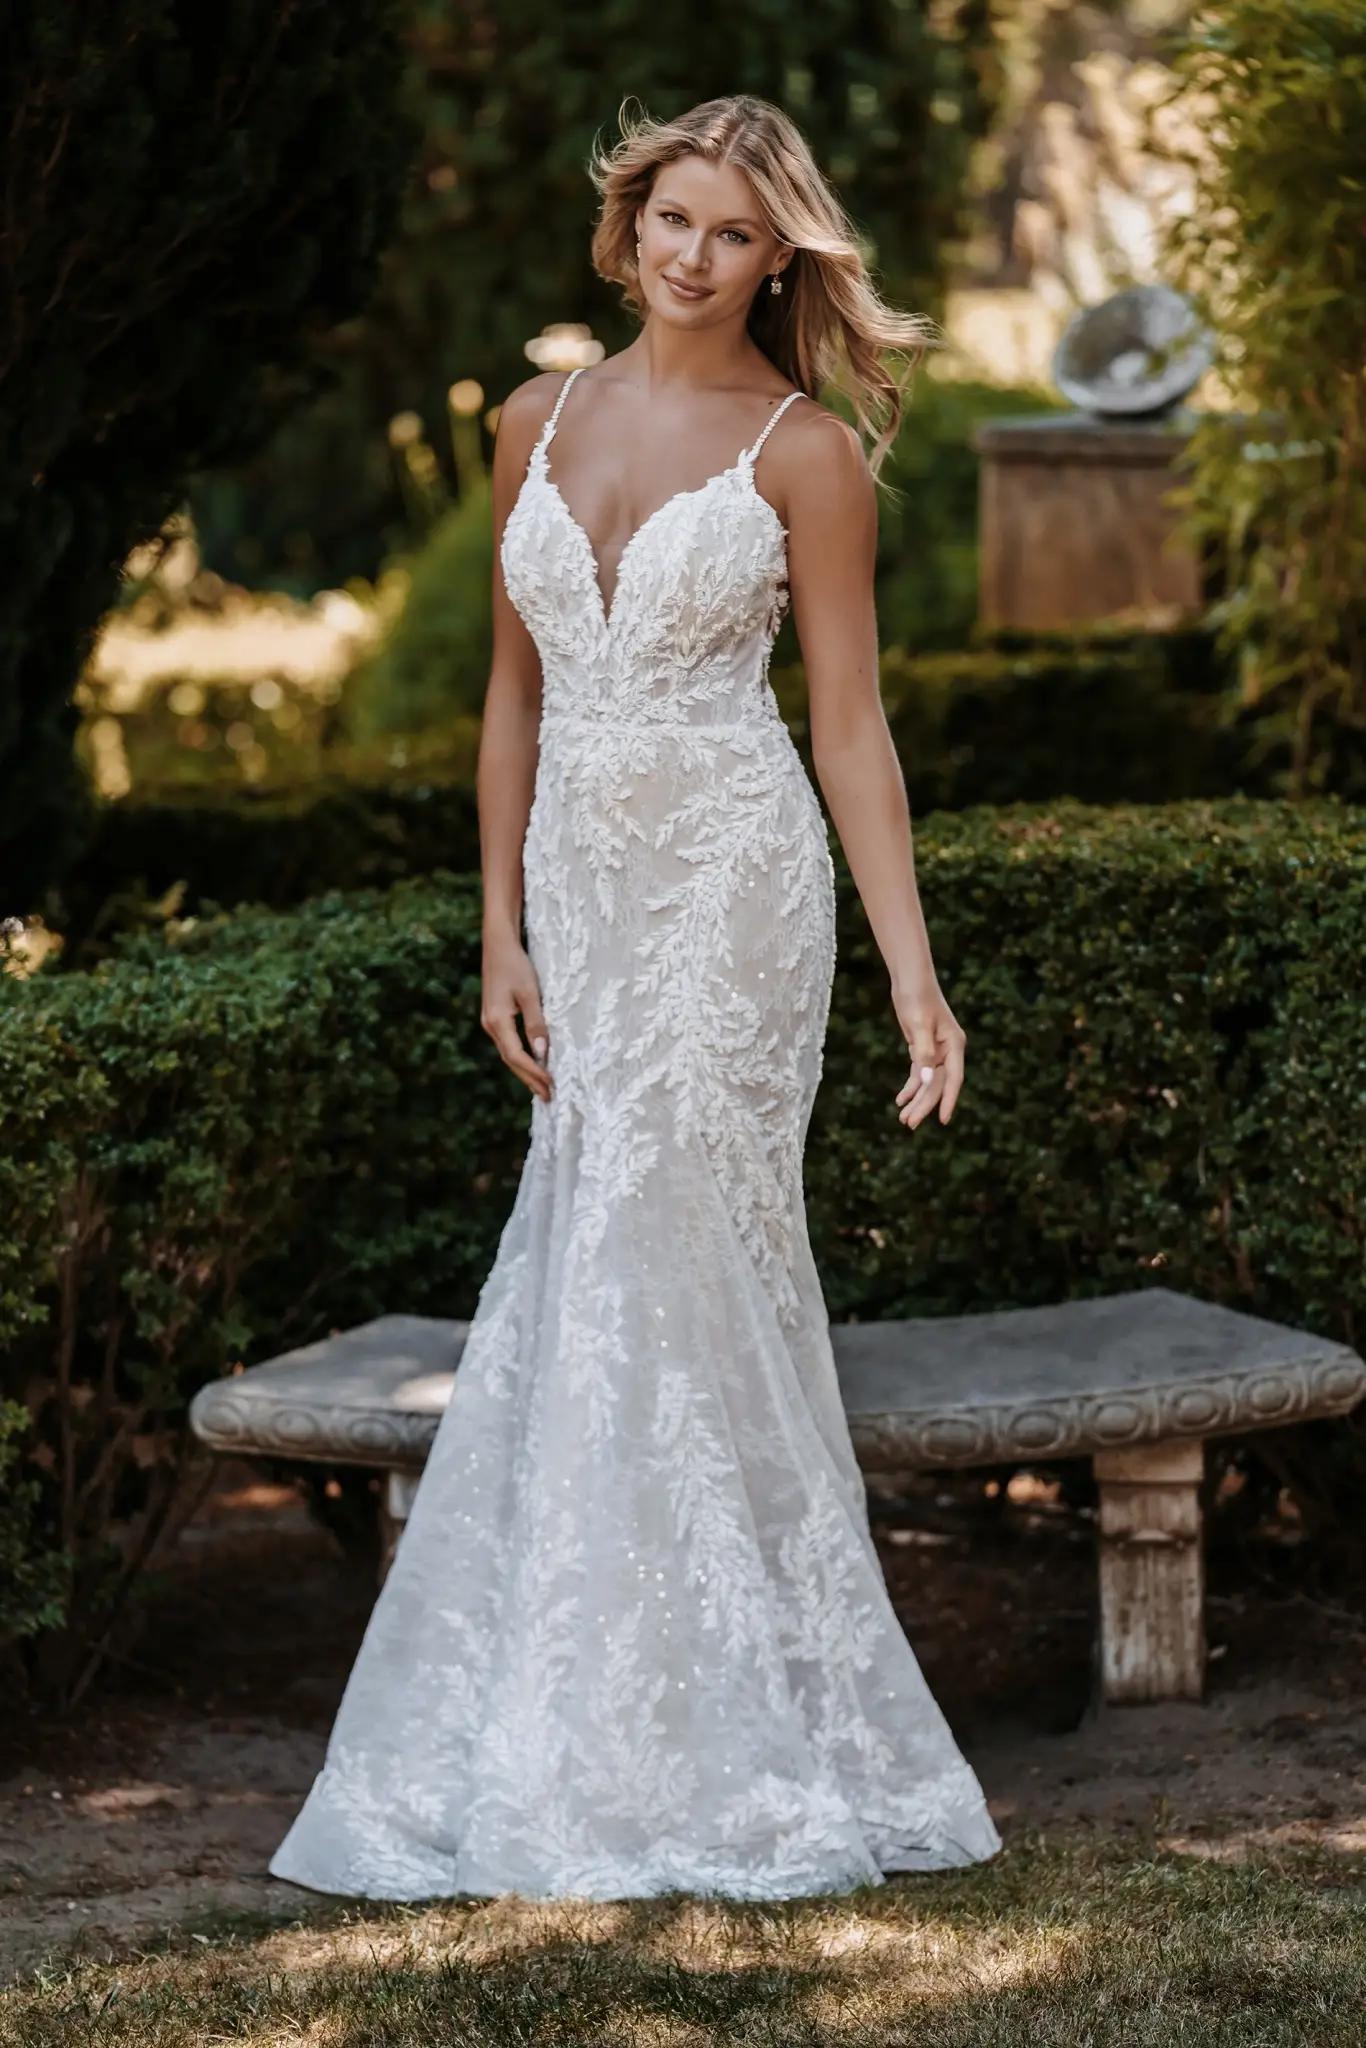 Outdoor Wedding Dresses: Styles That Shine in Natural Settings Image